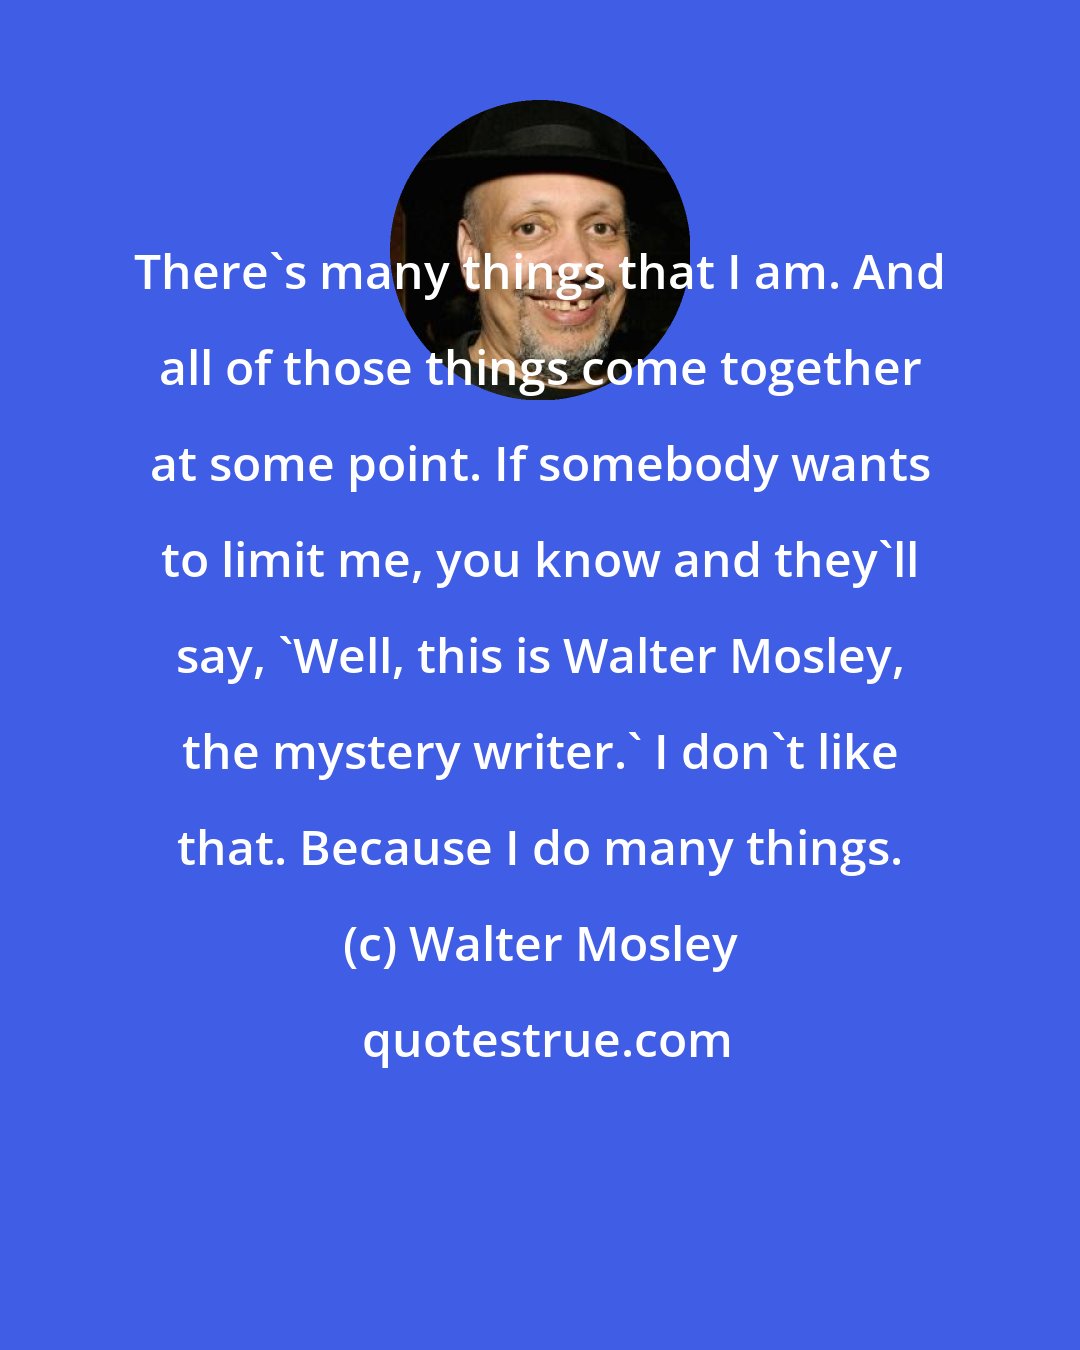 Walter Mosley: There's many things that I am. And all of those things come together at some point. If somebody wants to limit me, you know and they'll say, 'Well, this is Walter Mosley, the mystery writer.' I don't like that. Because I do many things.